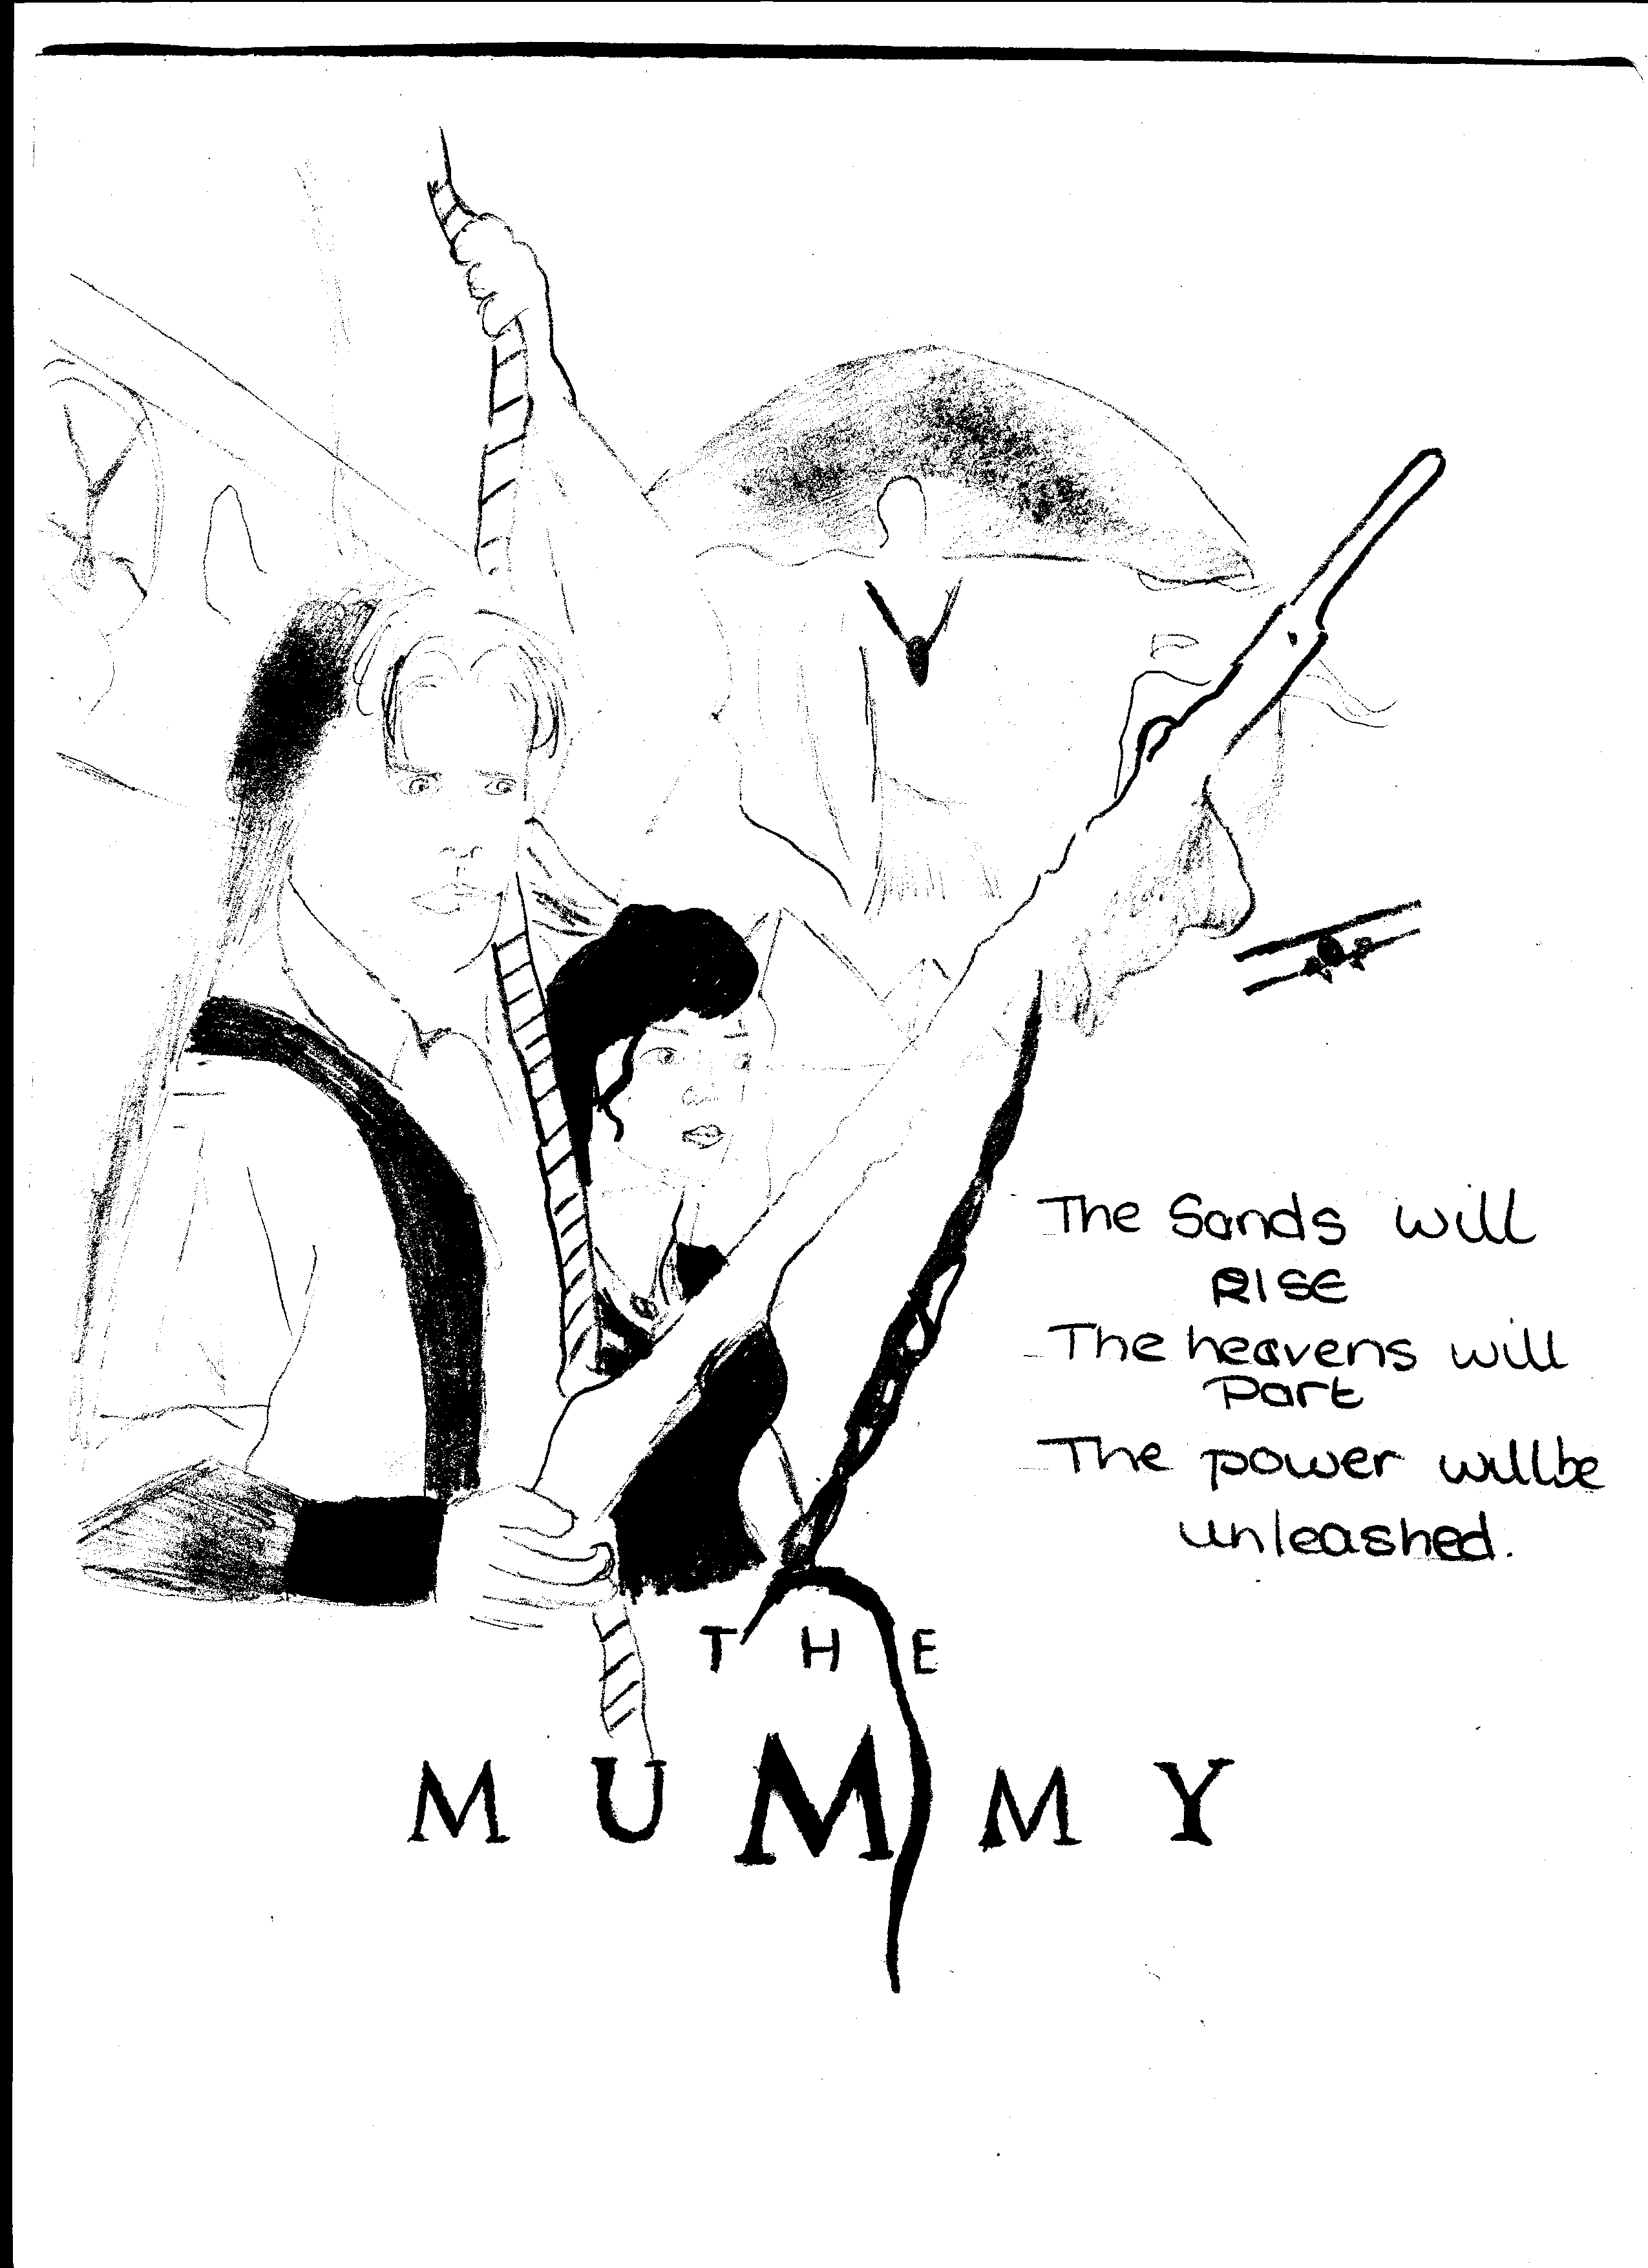 sketch of mummy poster by madfish